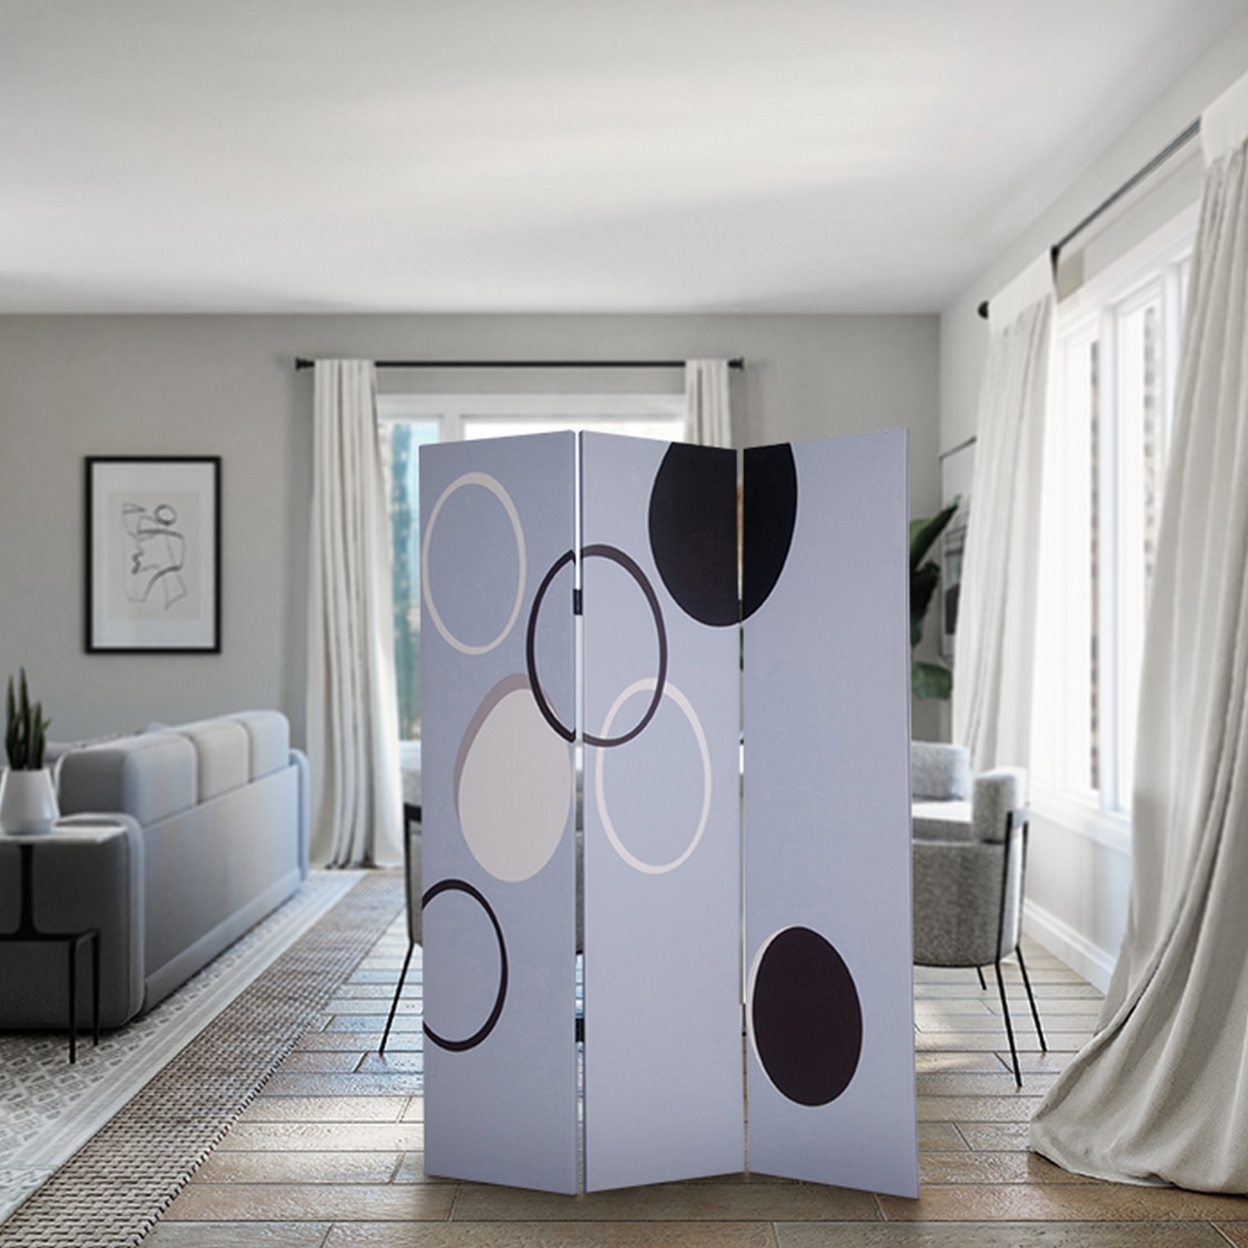 3 Panel Room Divider With Overlapping Circles Pattern, Black And Gray- Saltoro Sherpi